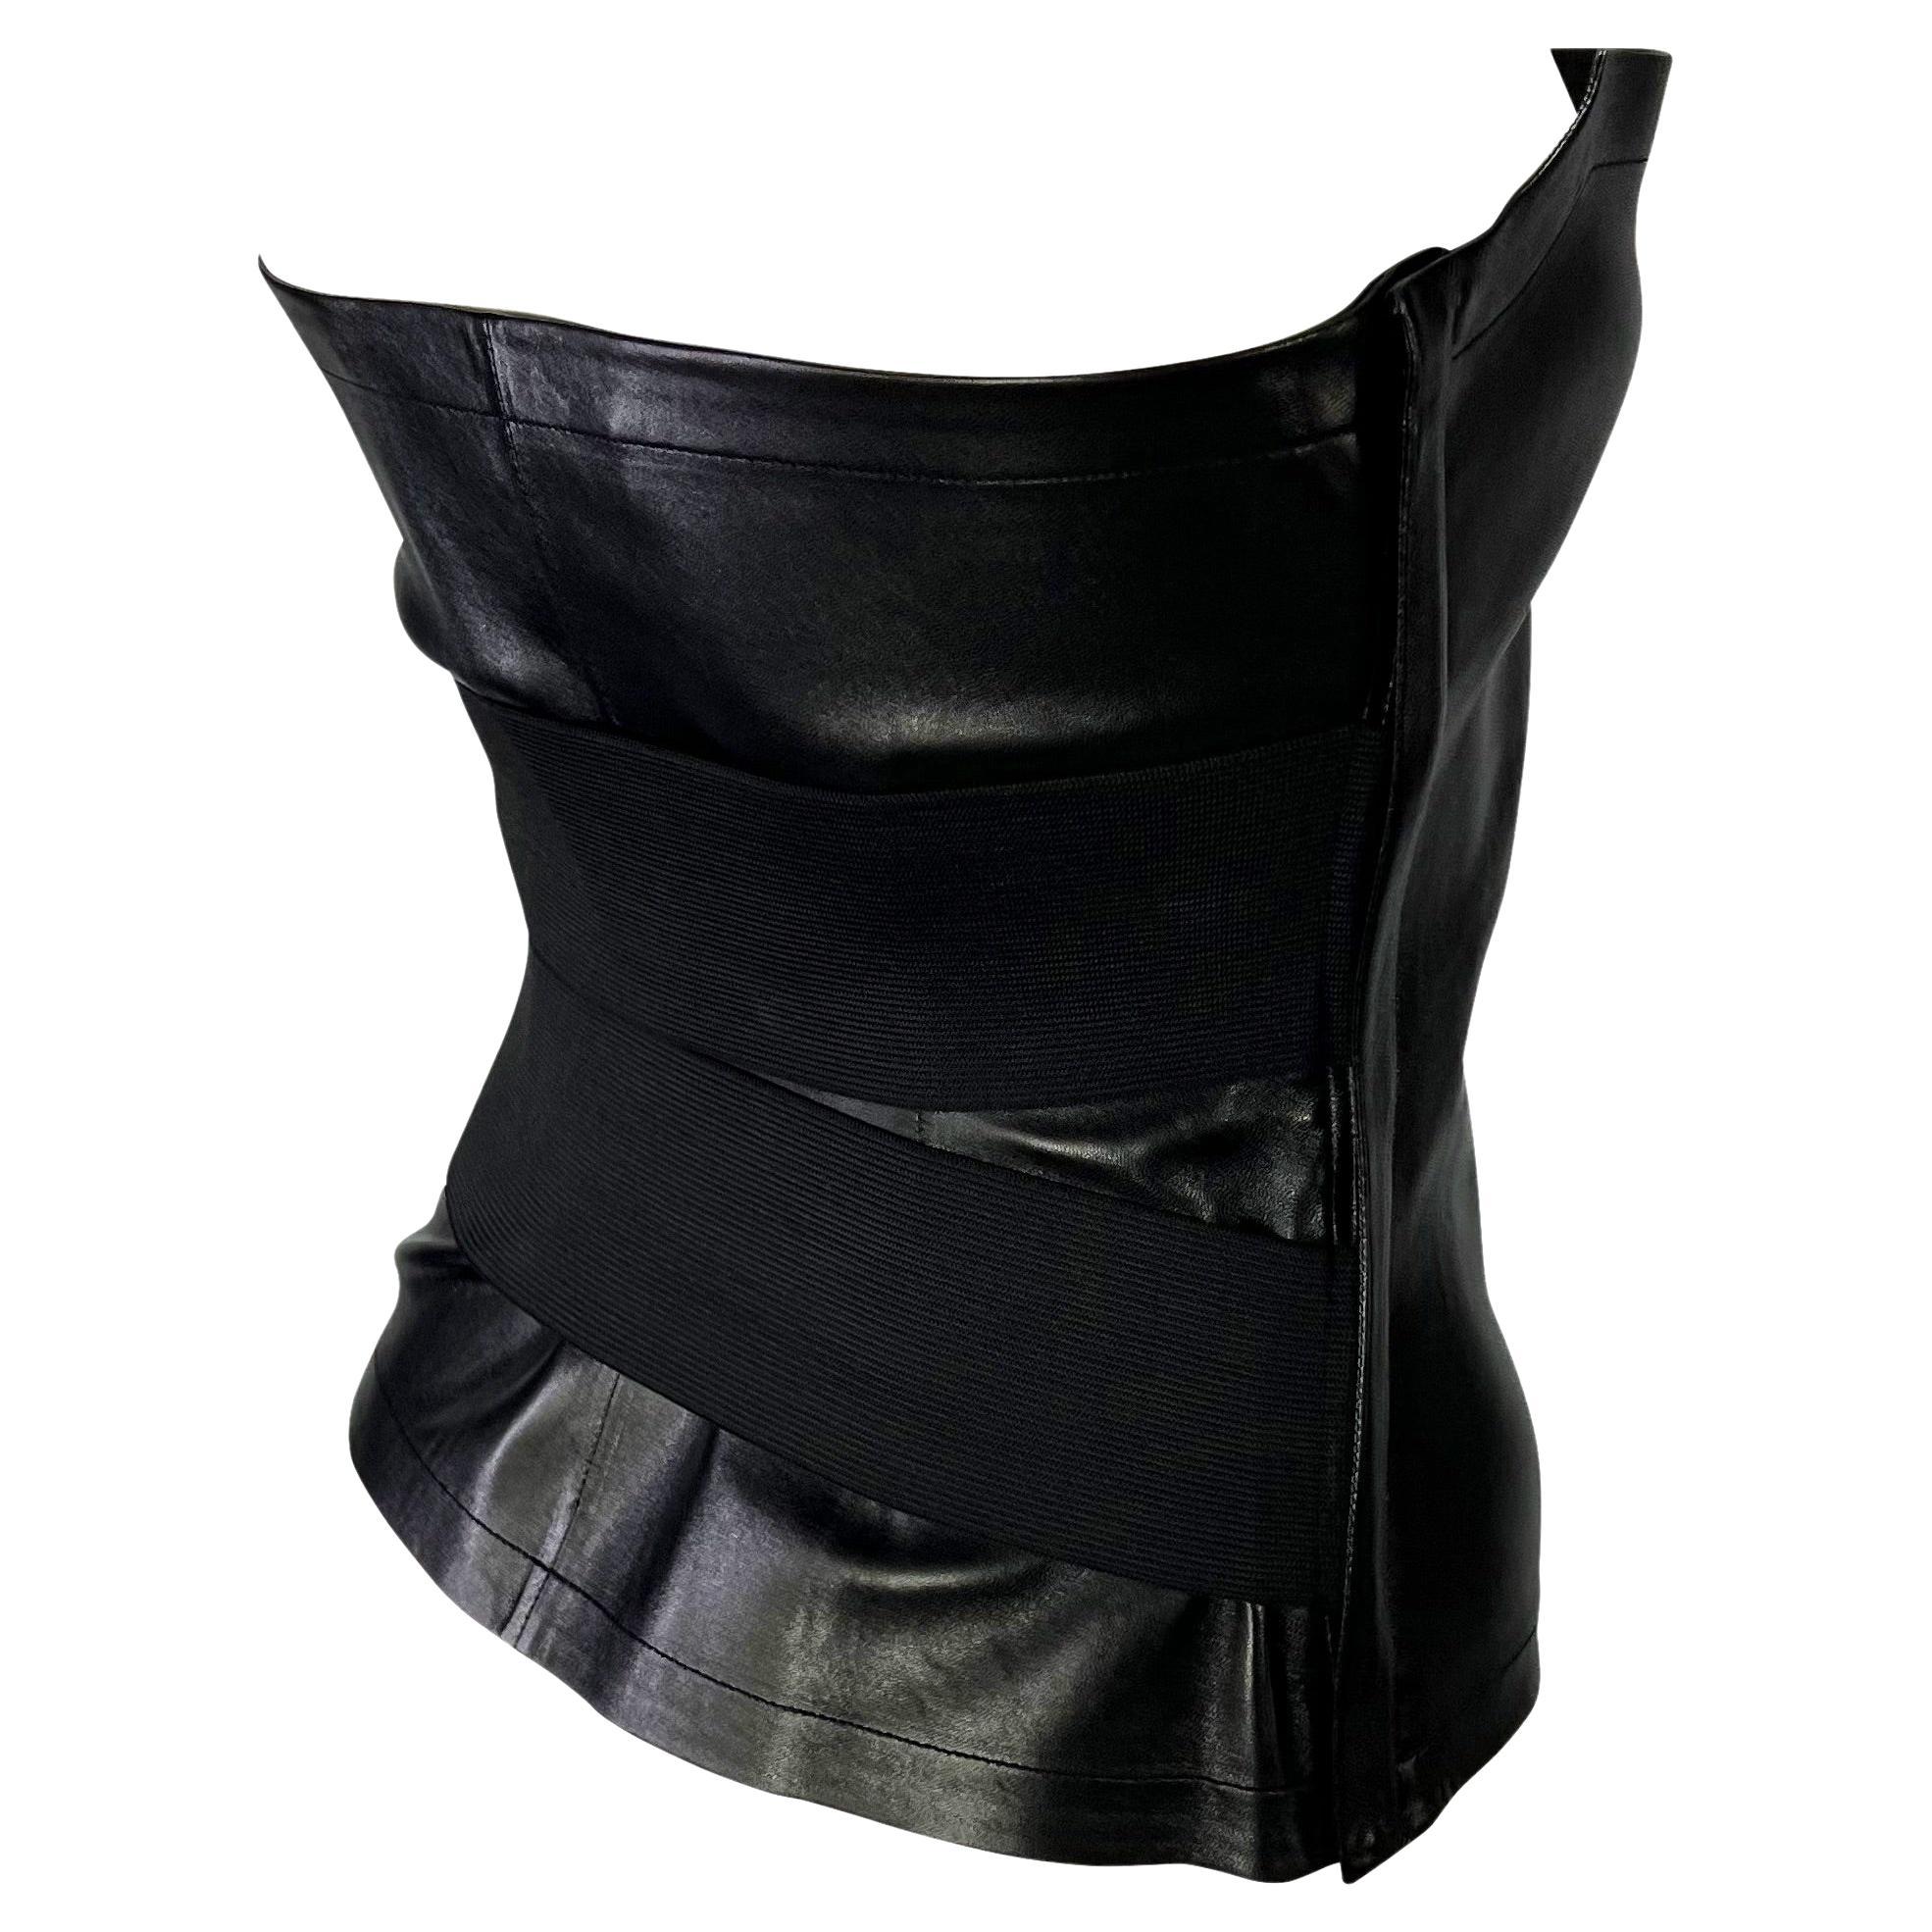 Women's NWT S/S 2001 Yves Saint Laurent by Tom Ford Black Leather Bandage Strap Bustier For Sale